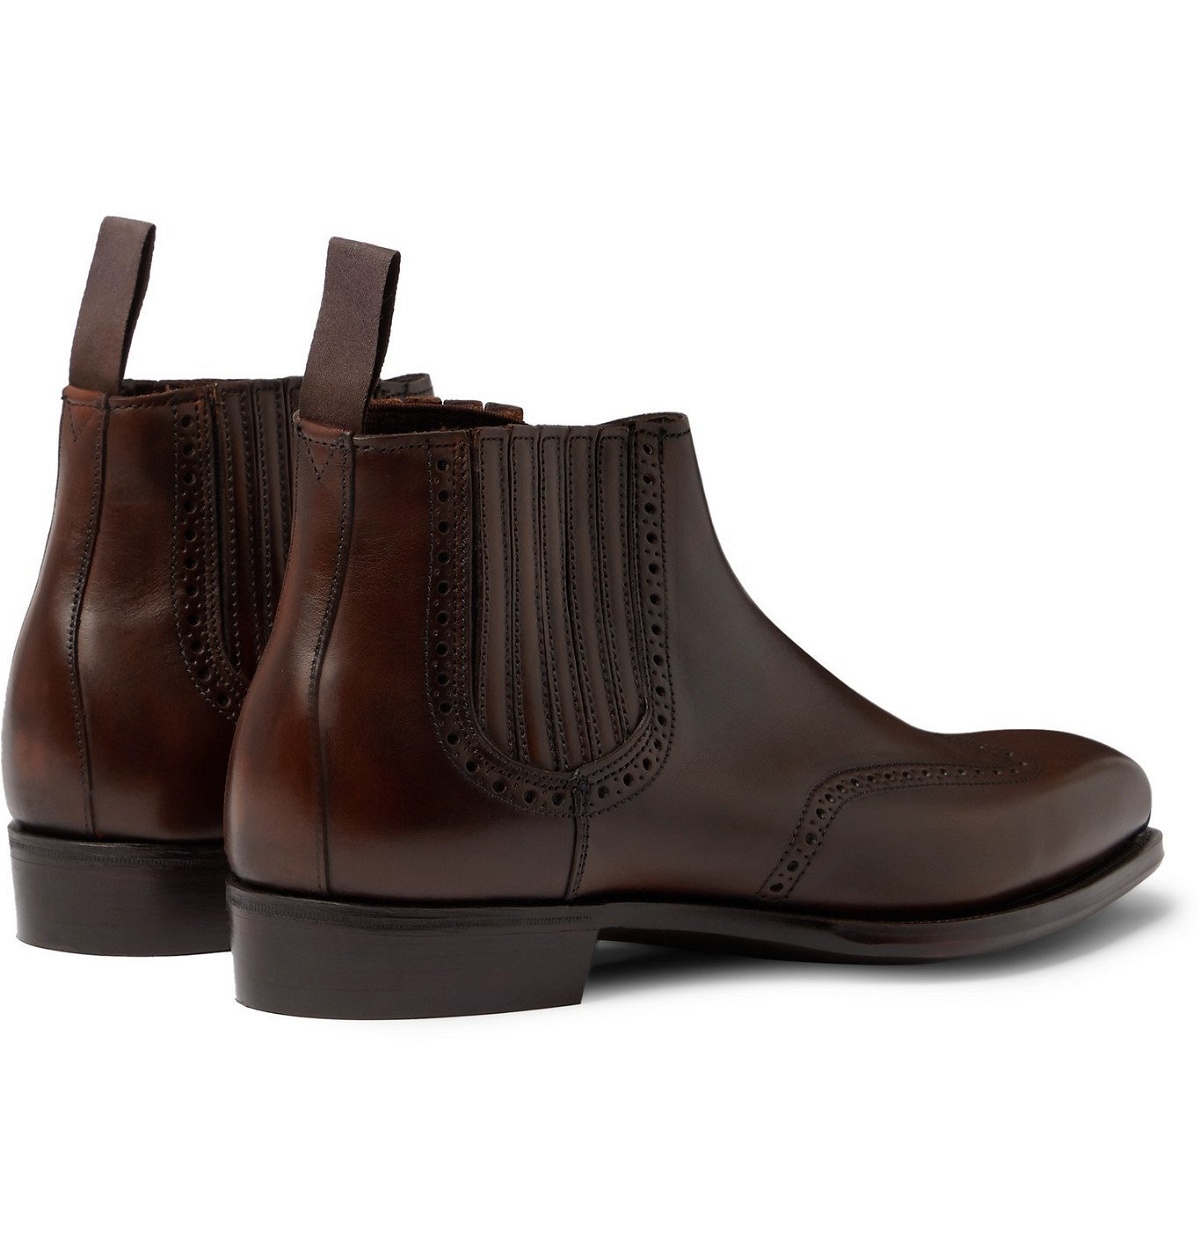 Kingsman - George Cleverley Veronique Leather Brogue Chelsea Boots ...